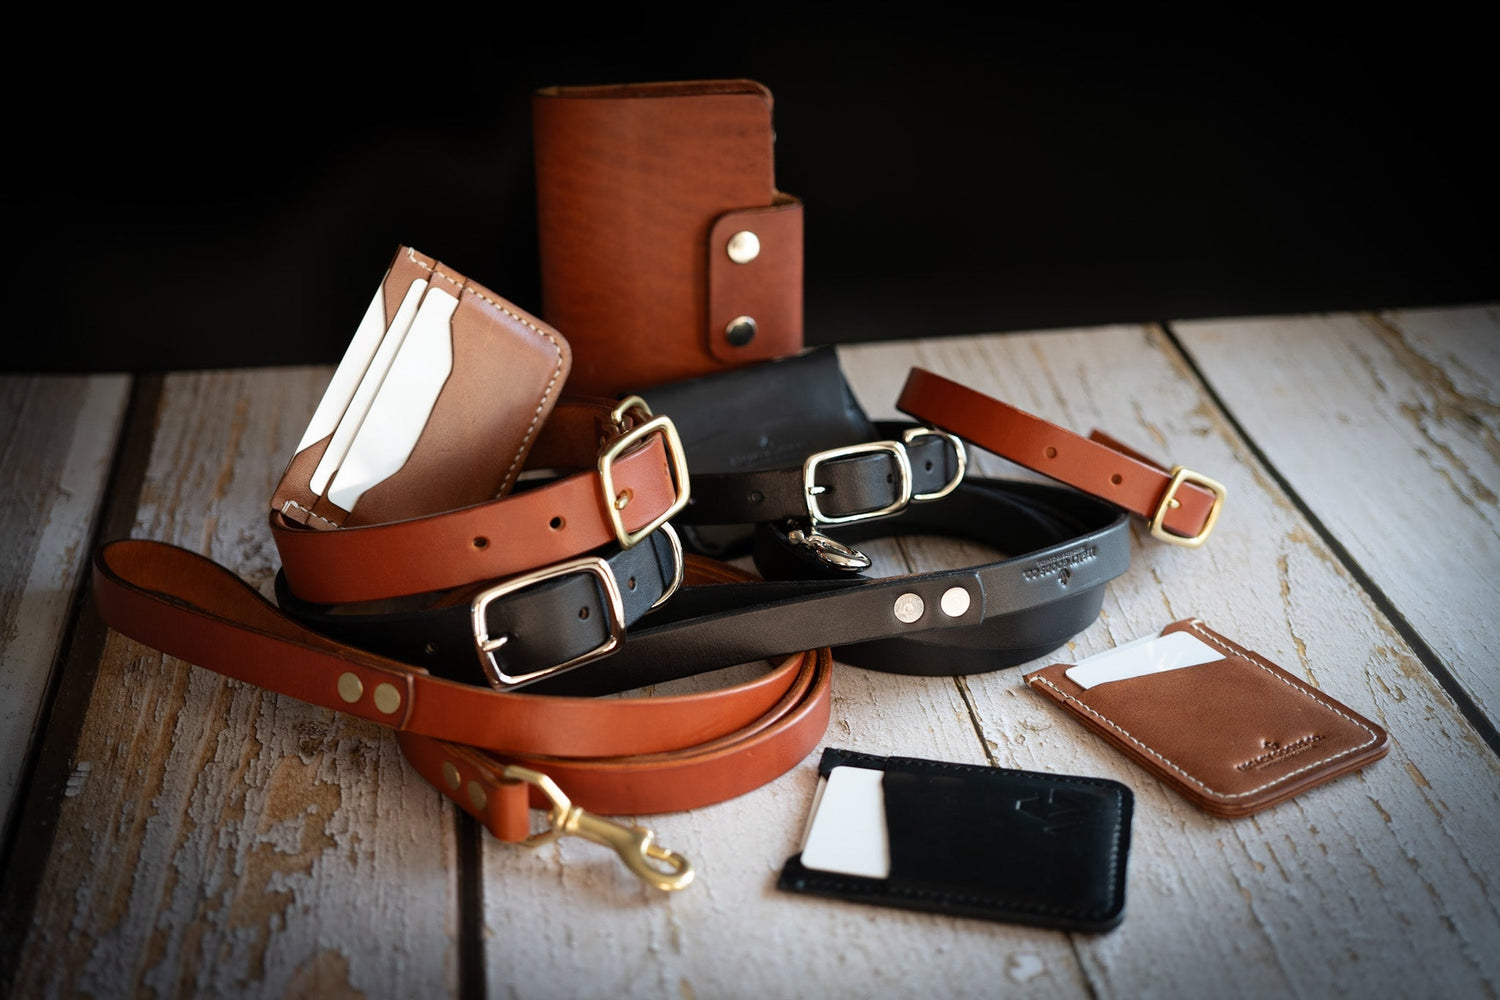 The launch collection contains wallets, dog leash, dog collars and even a Field Notes cover!